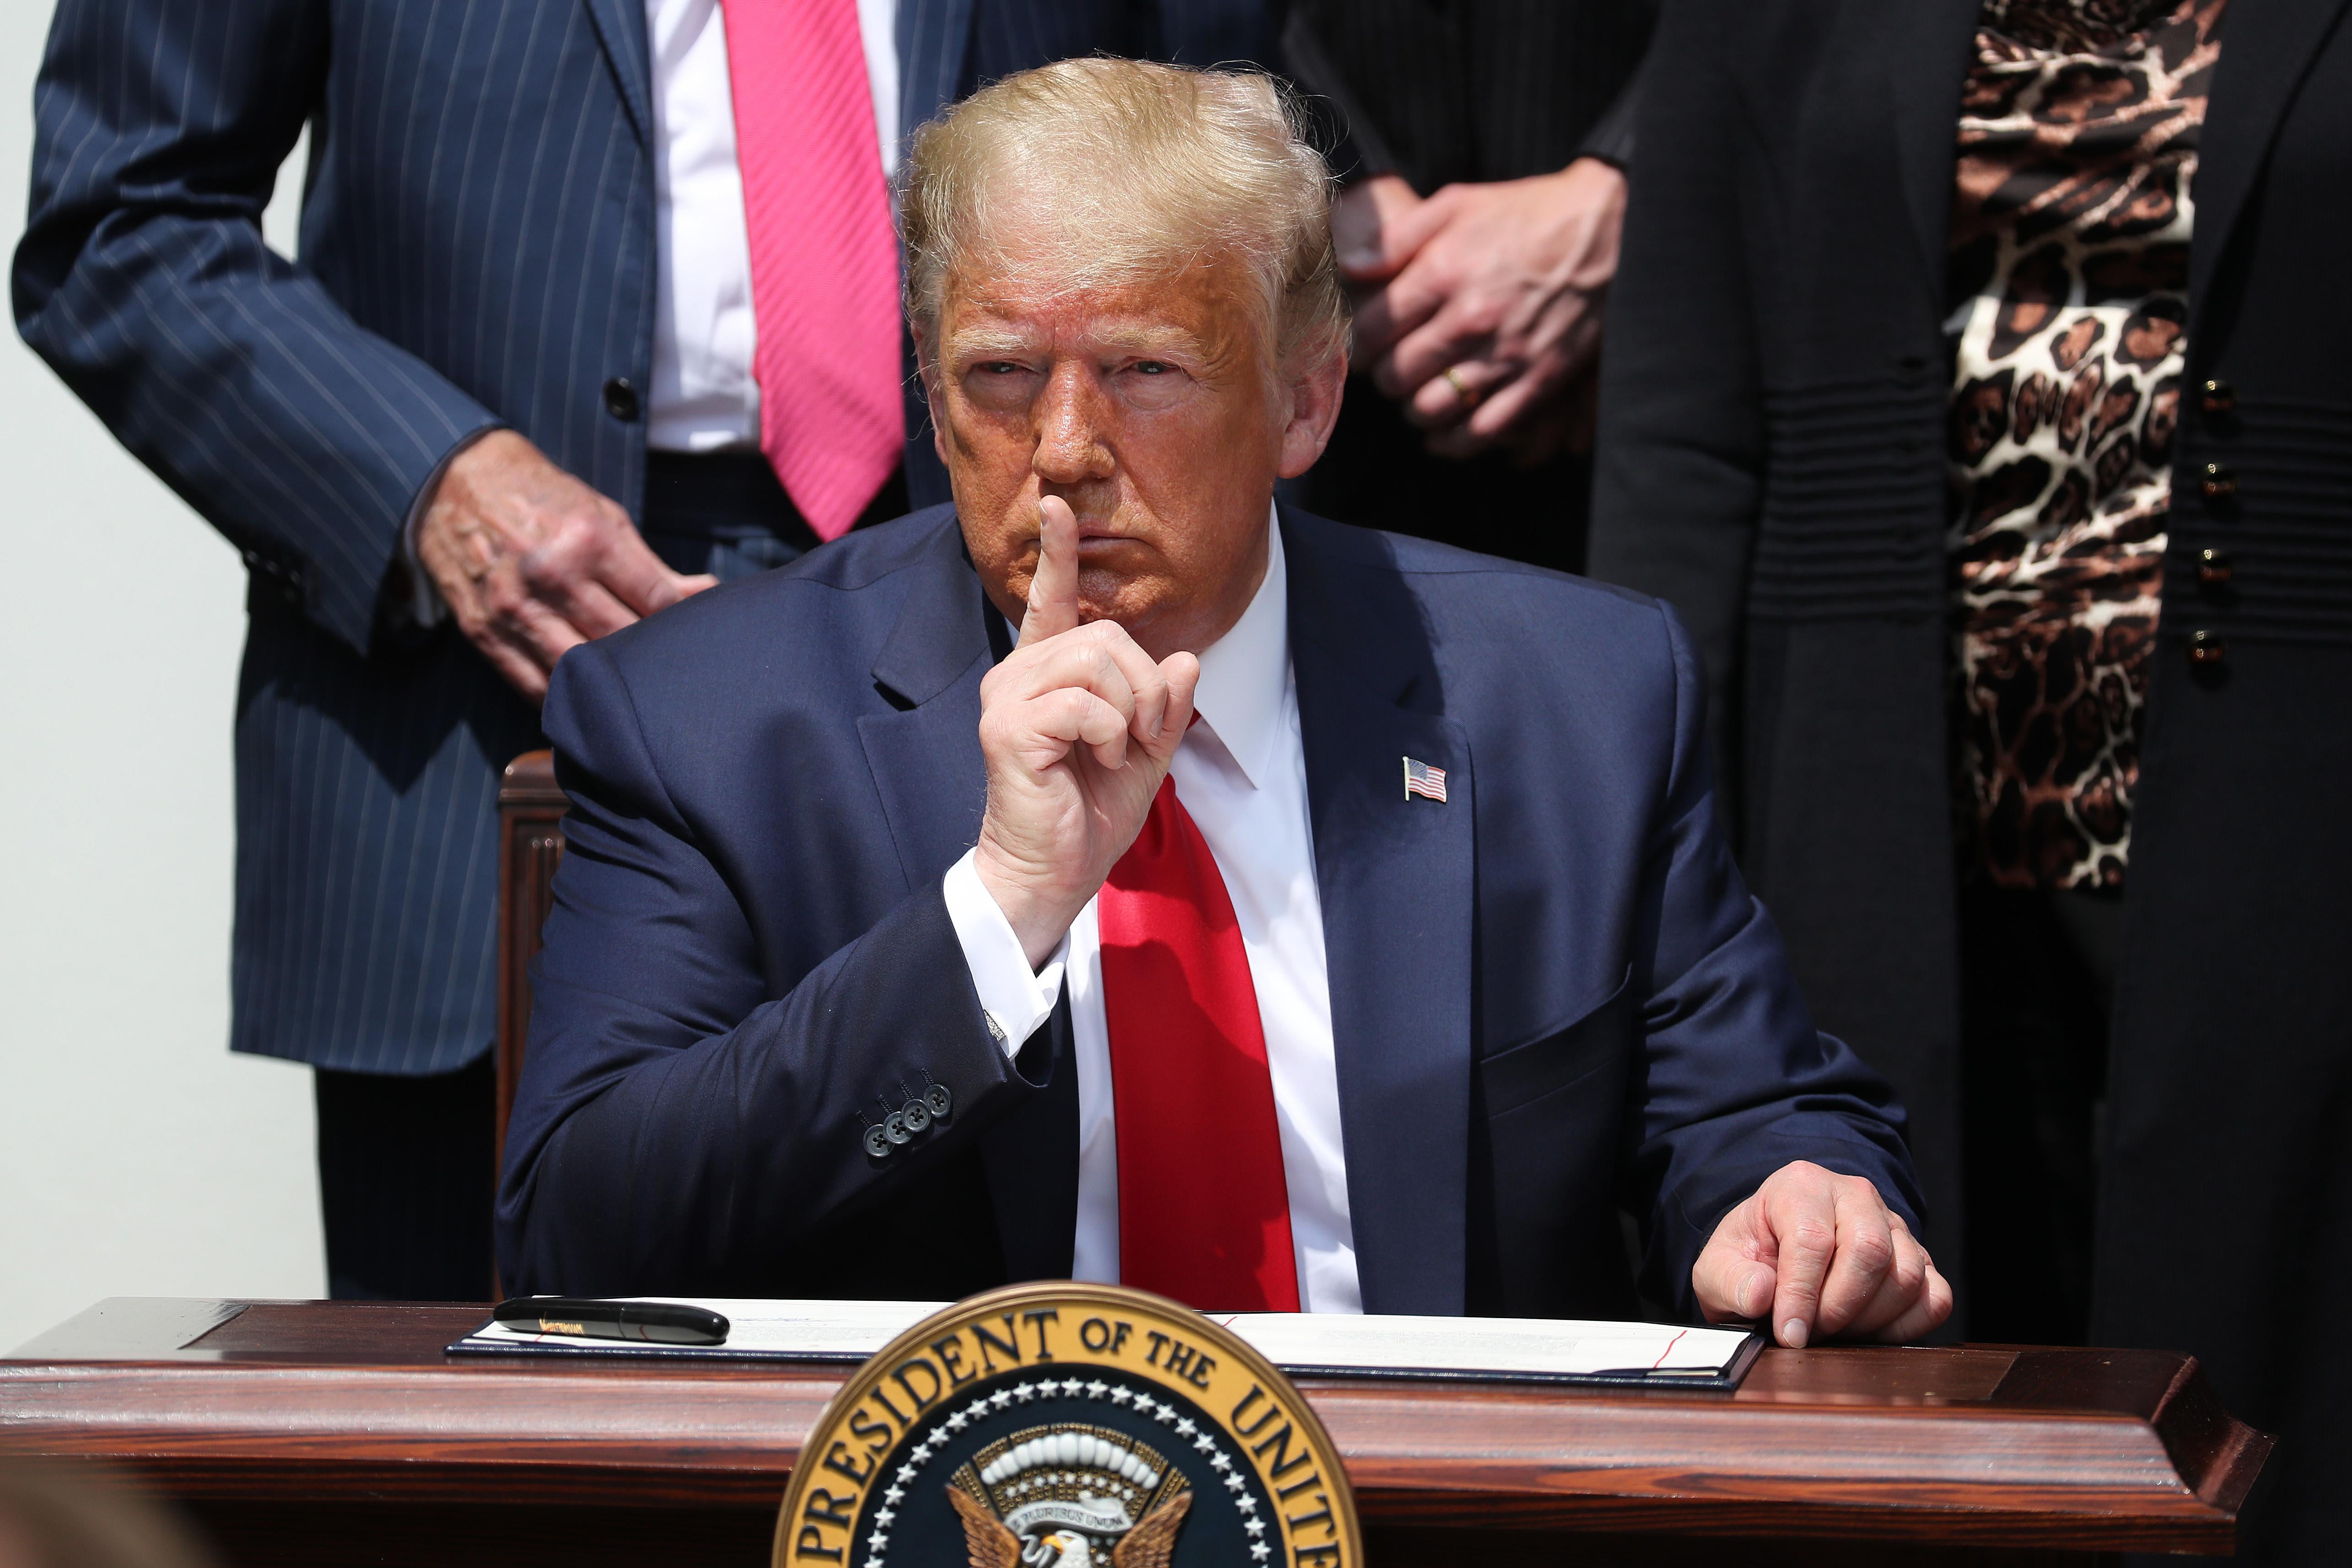 Trump holds his index finger up to his mouth in a shushing signal while sitting at a desk in the Rose Garden.